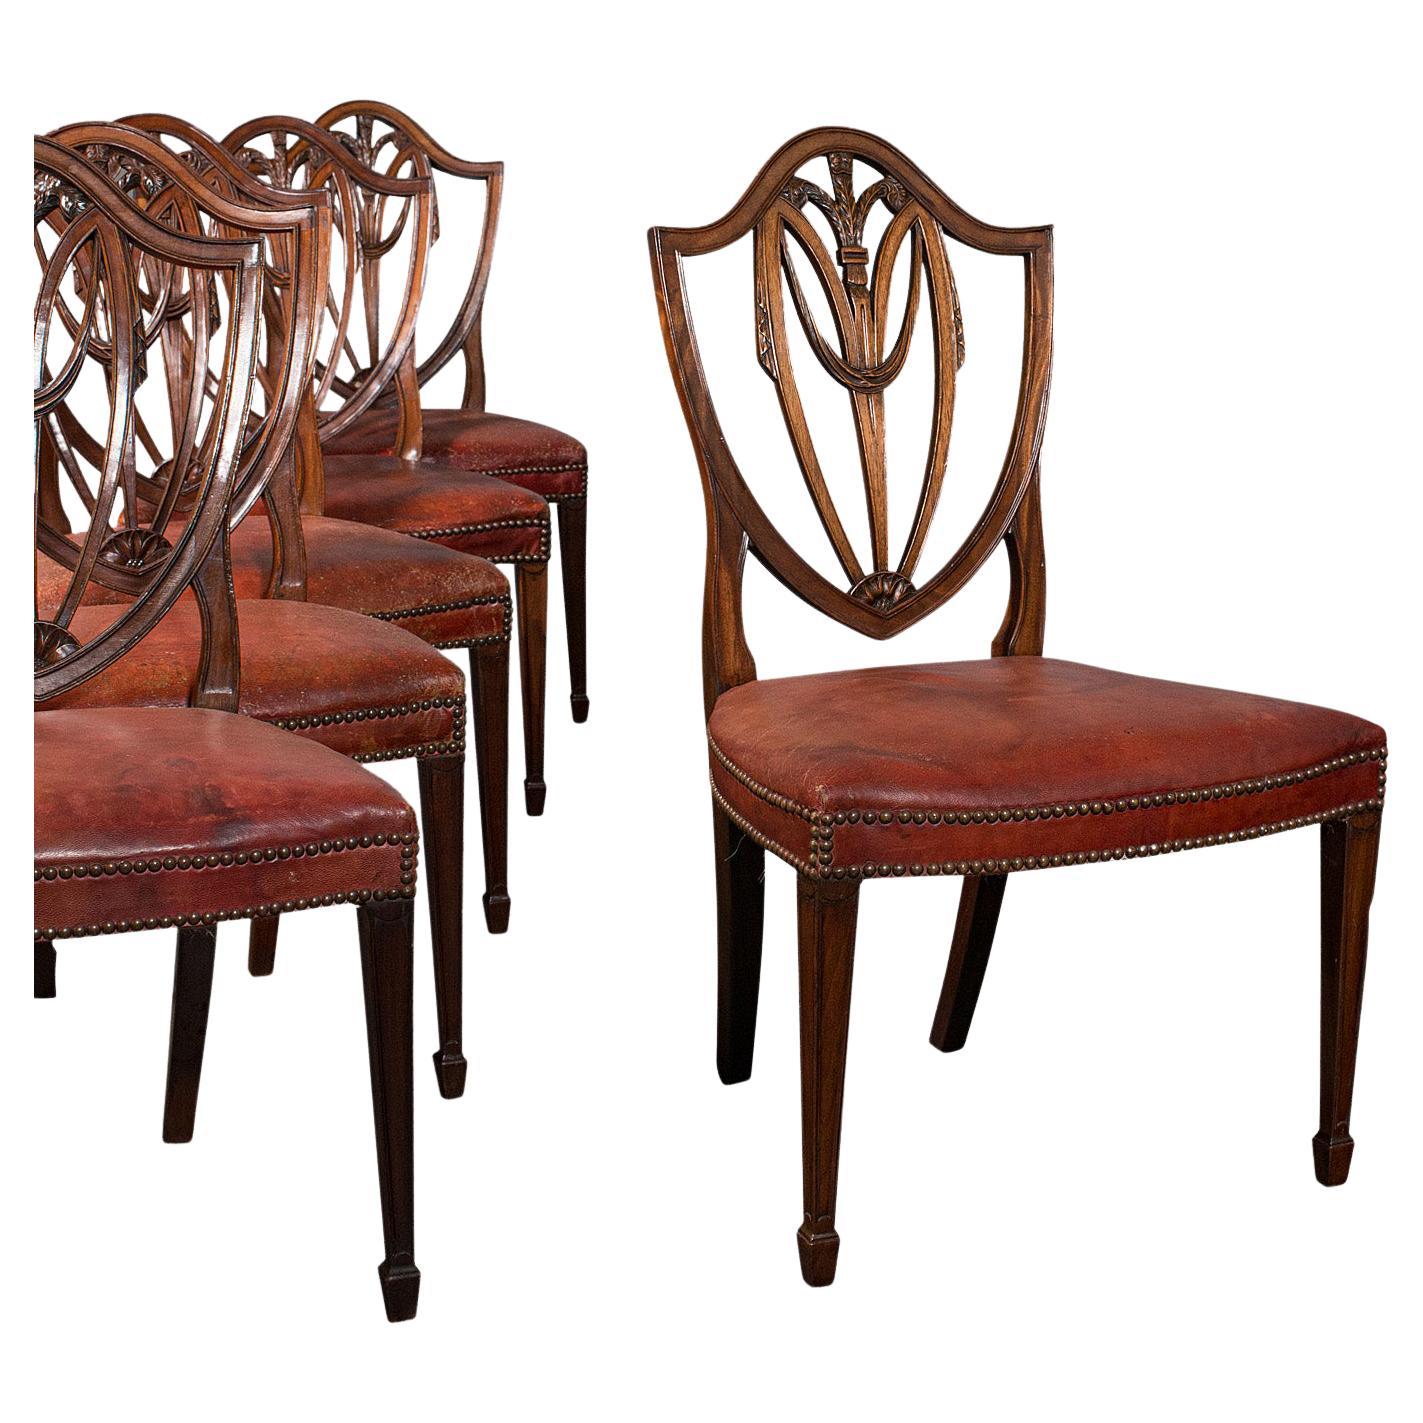 Set of 6, Antique Shield Back Chairs, Dining Seat, After Hepplewhite, Georgian